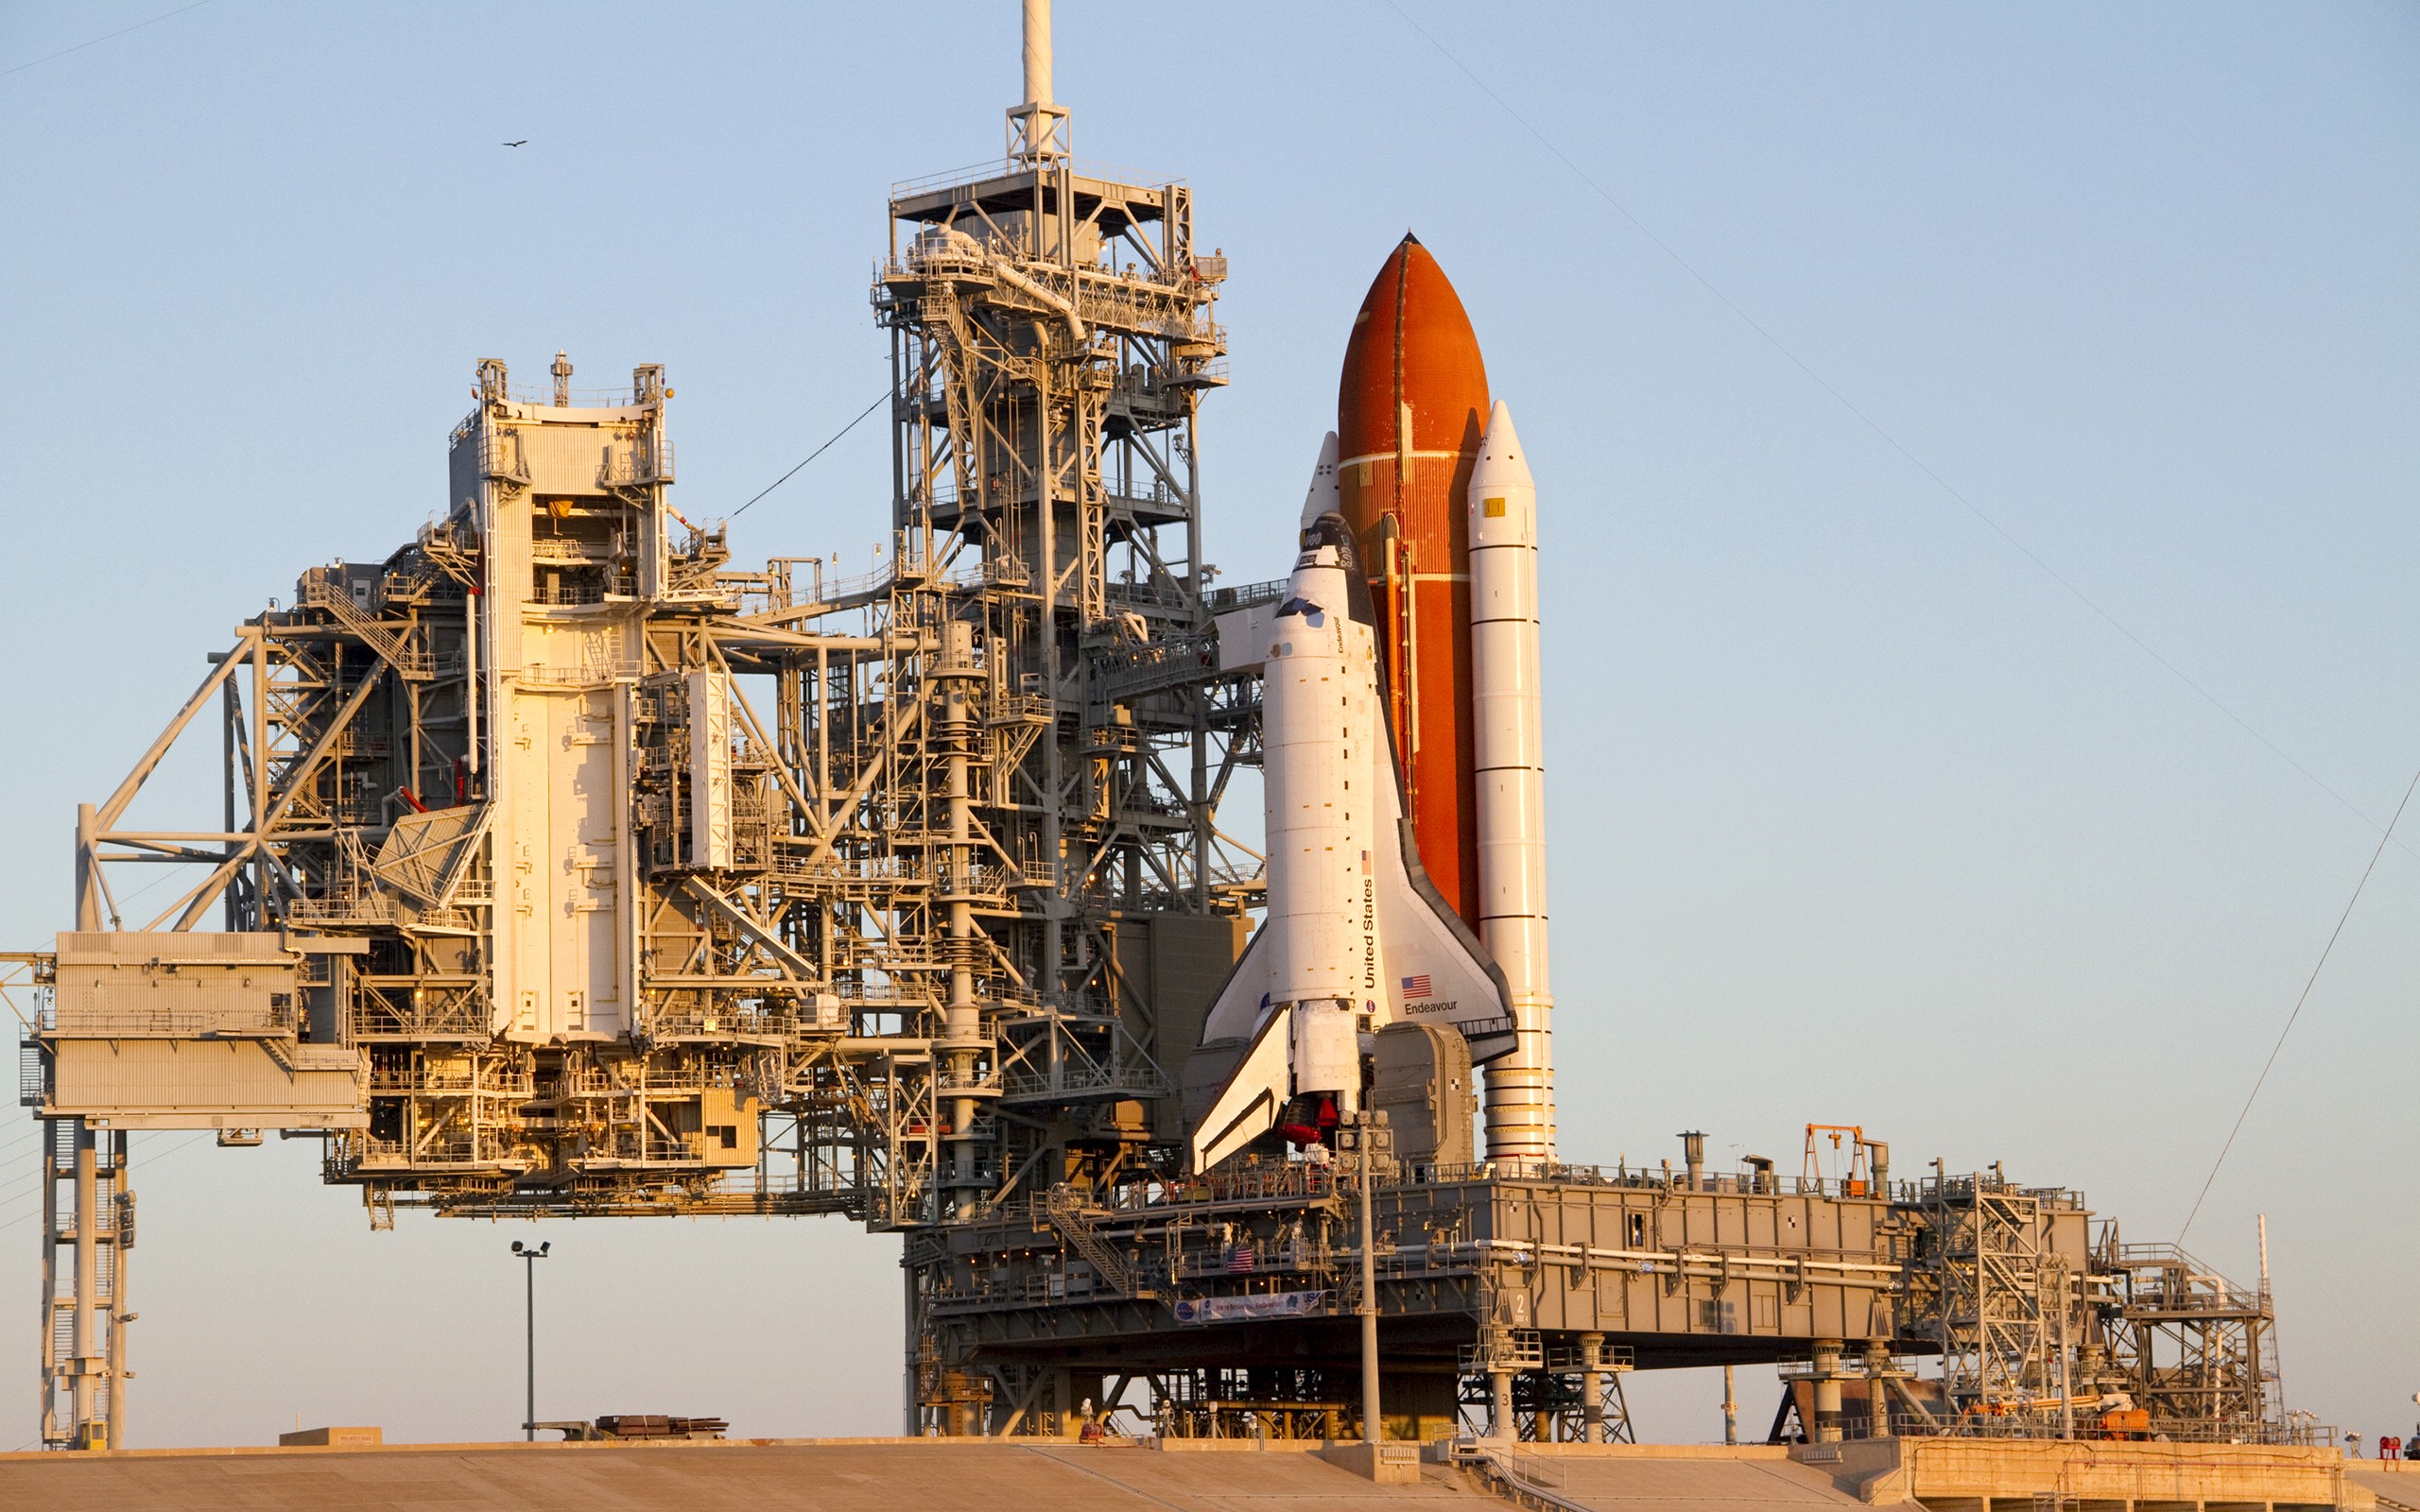 General 2560x1600 Space Shuttle Endeavour NASA launch pads space shuttle vehicle